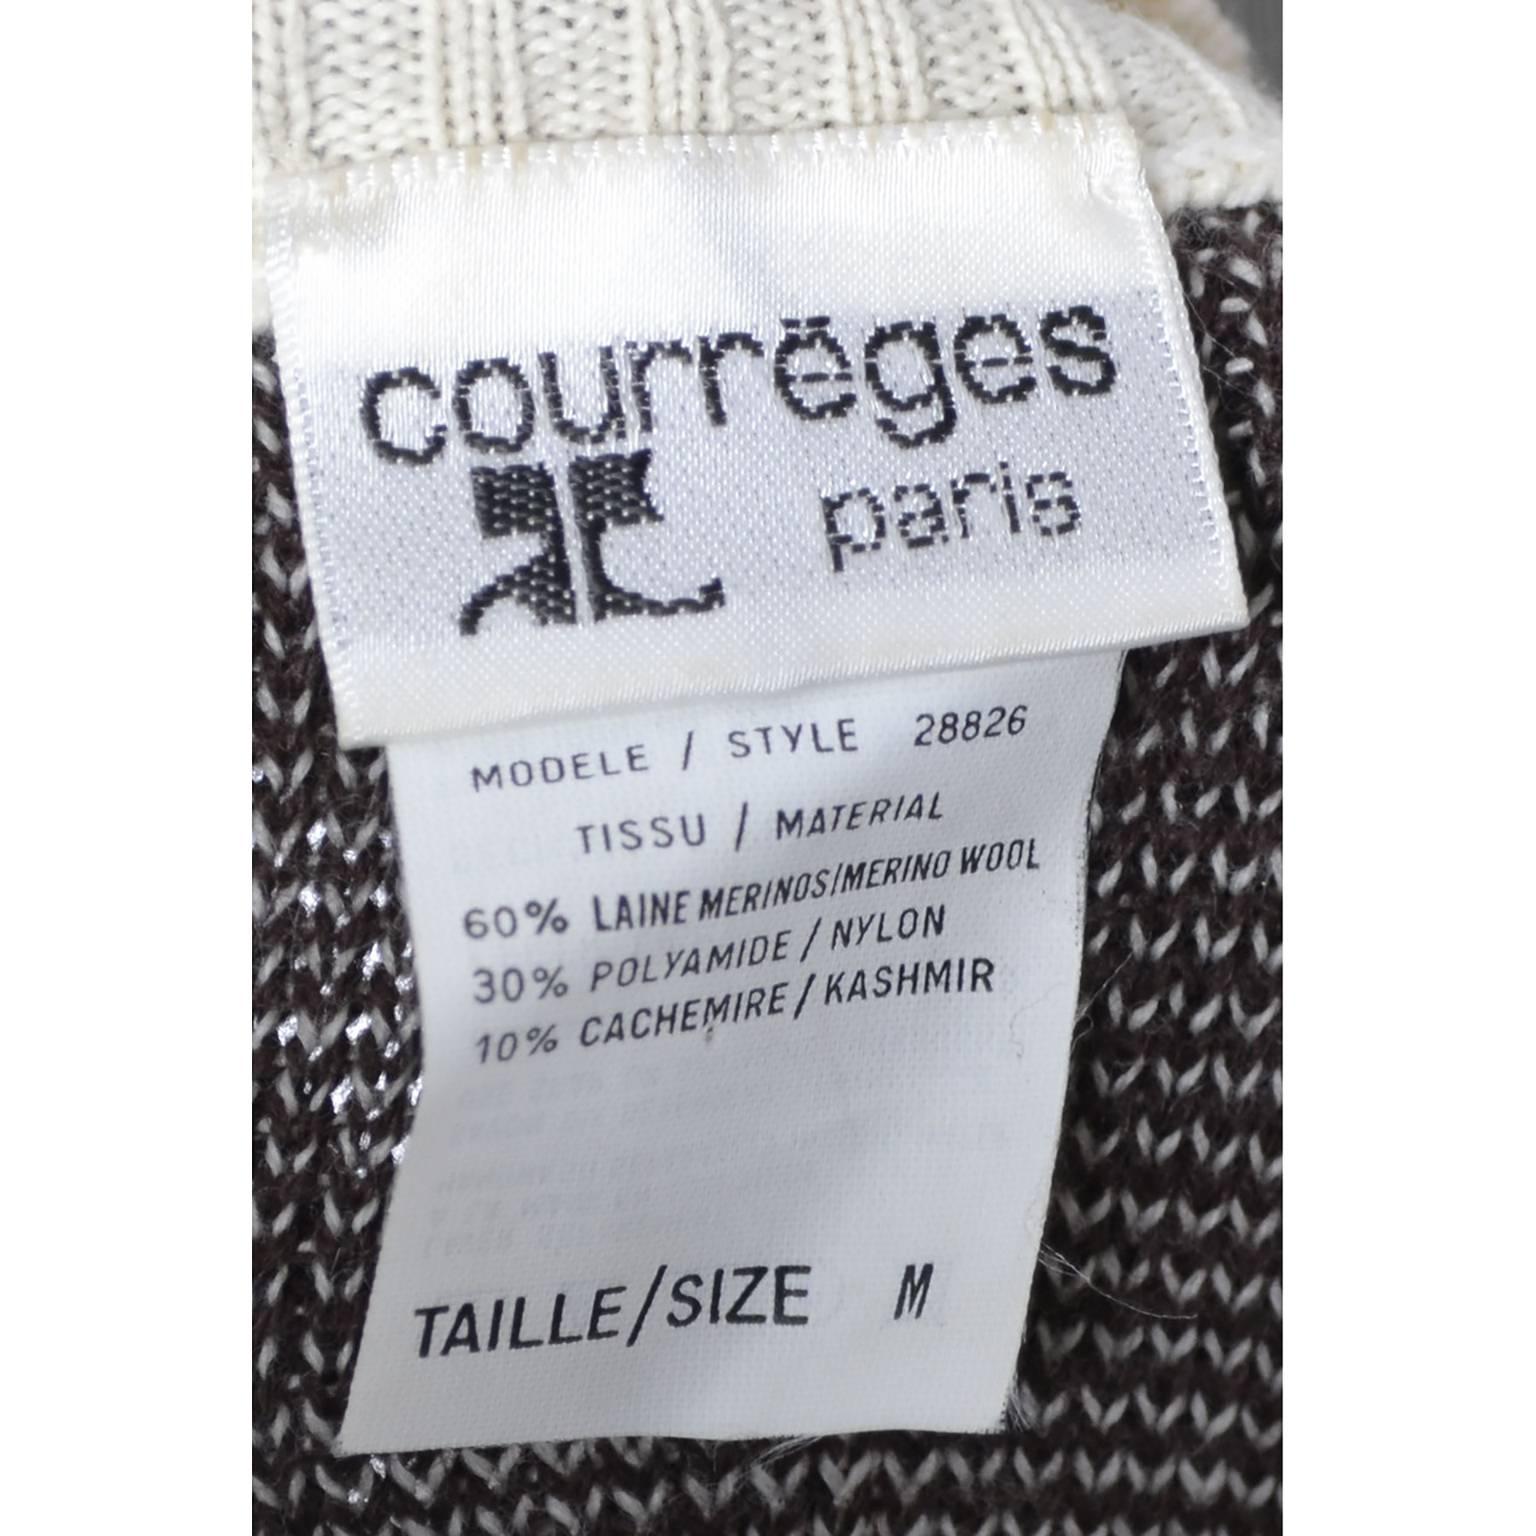 This is a great vintage brown and cream knit Courreges sweater in a 60% wool, 30% nylon and 10% cashmere blend.  This Courreges vintage sweater has contrasting cuffs and collar and a great snowflake on the front!  This sweater is labeled a size